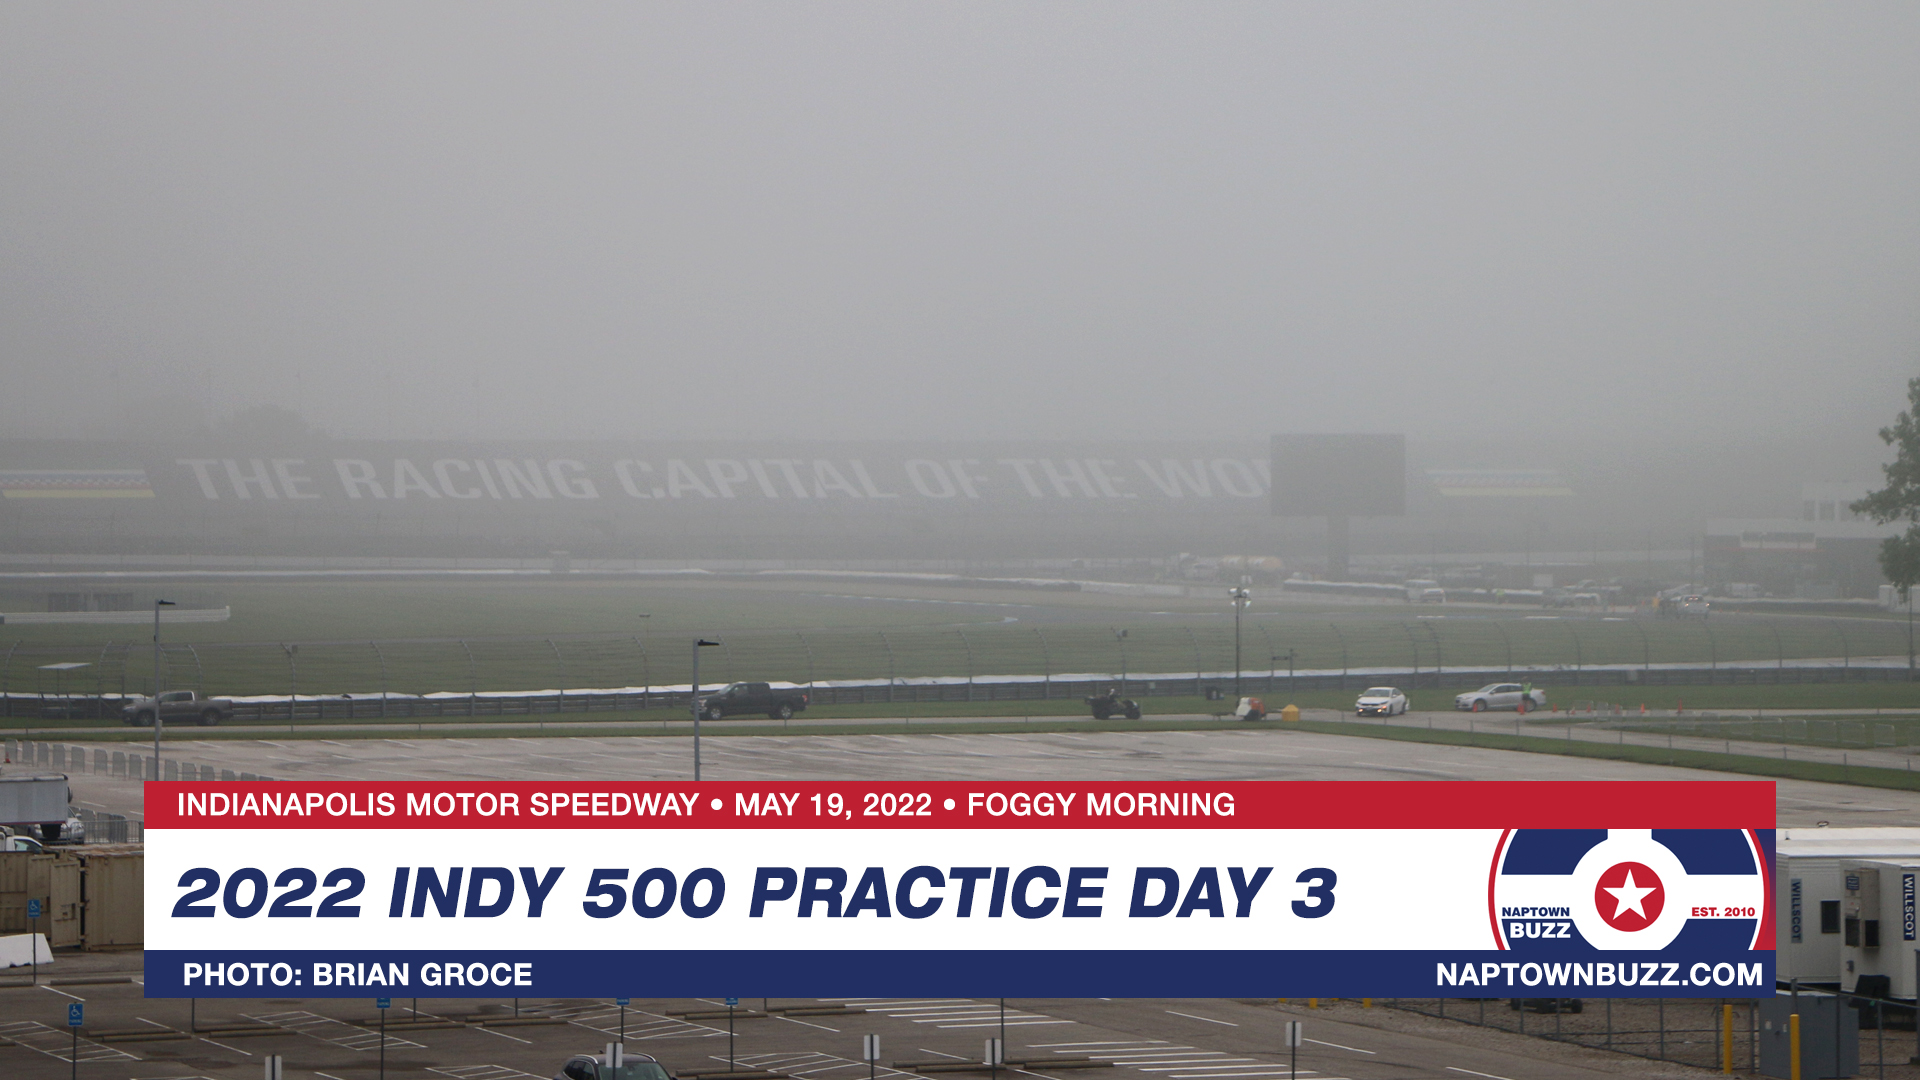 Foggy Morning on Indy 500 Practice Day 3 at Indianapolis Motor Speedway on May 19, 2022